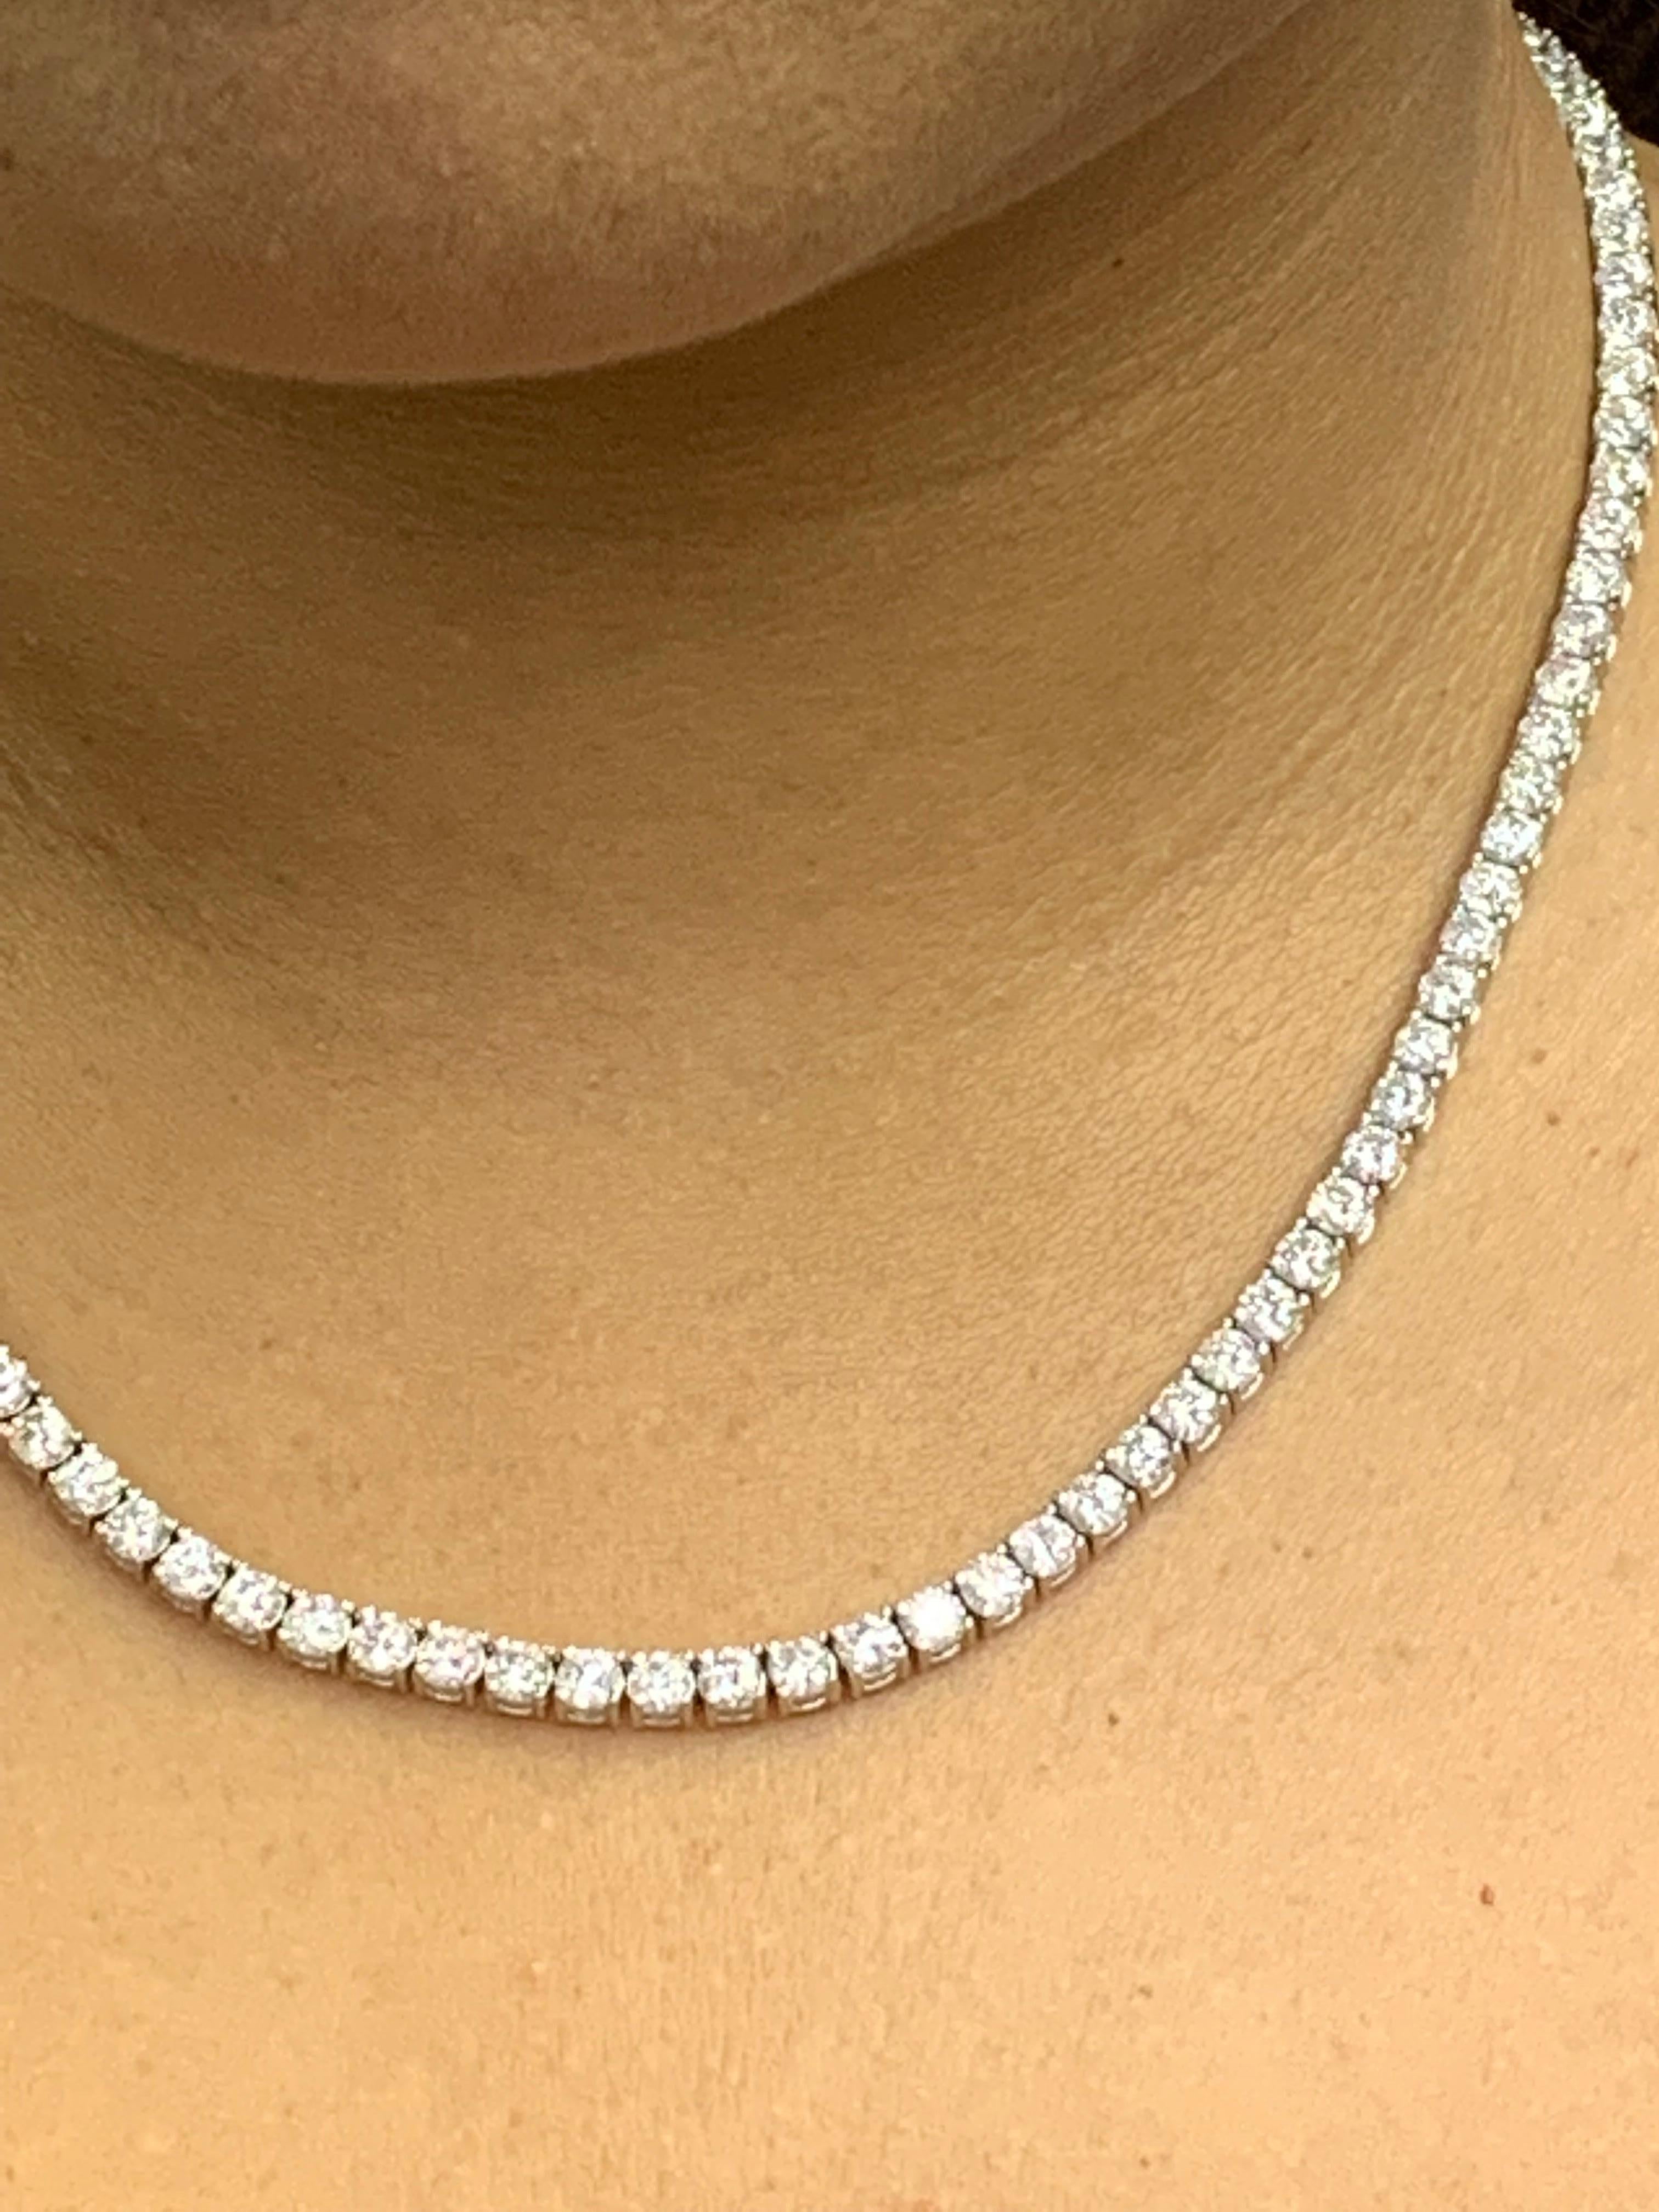 18 Carat Diamond Tennis Necklace in 14K White Gold For Sale 4